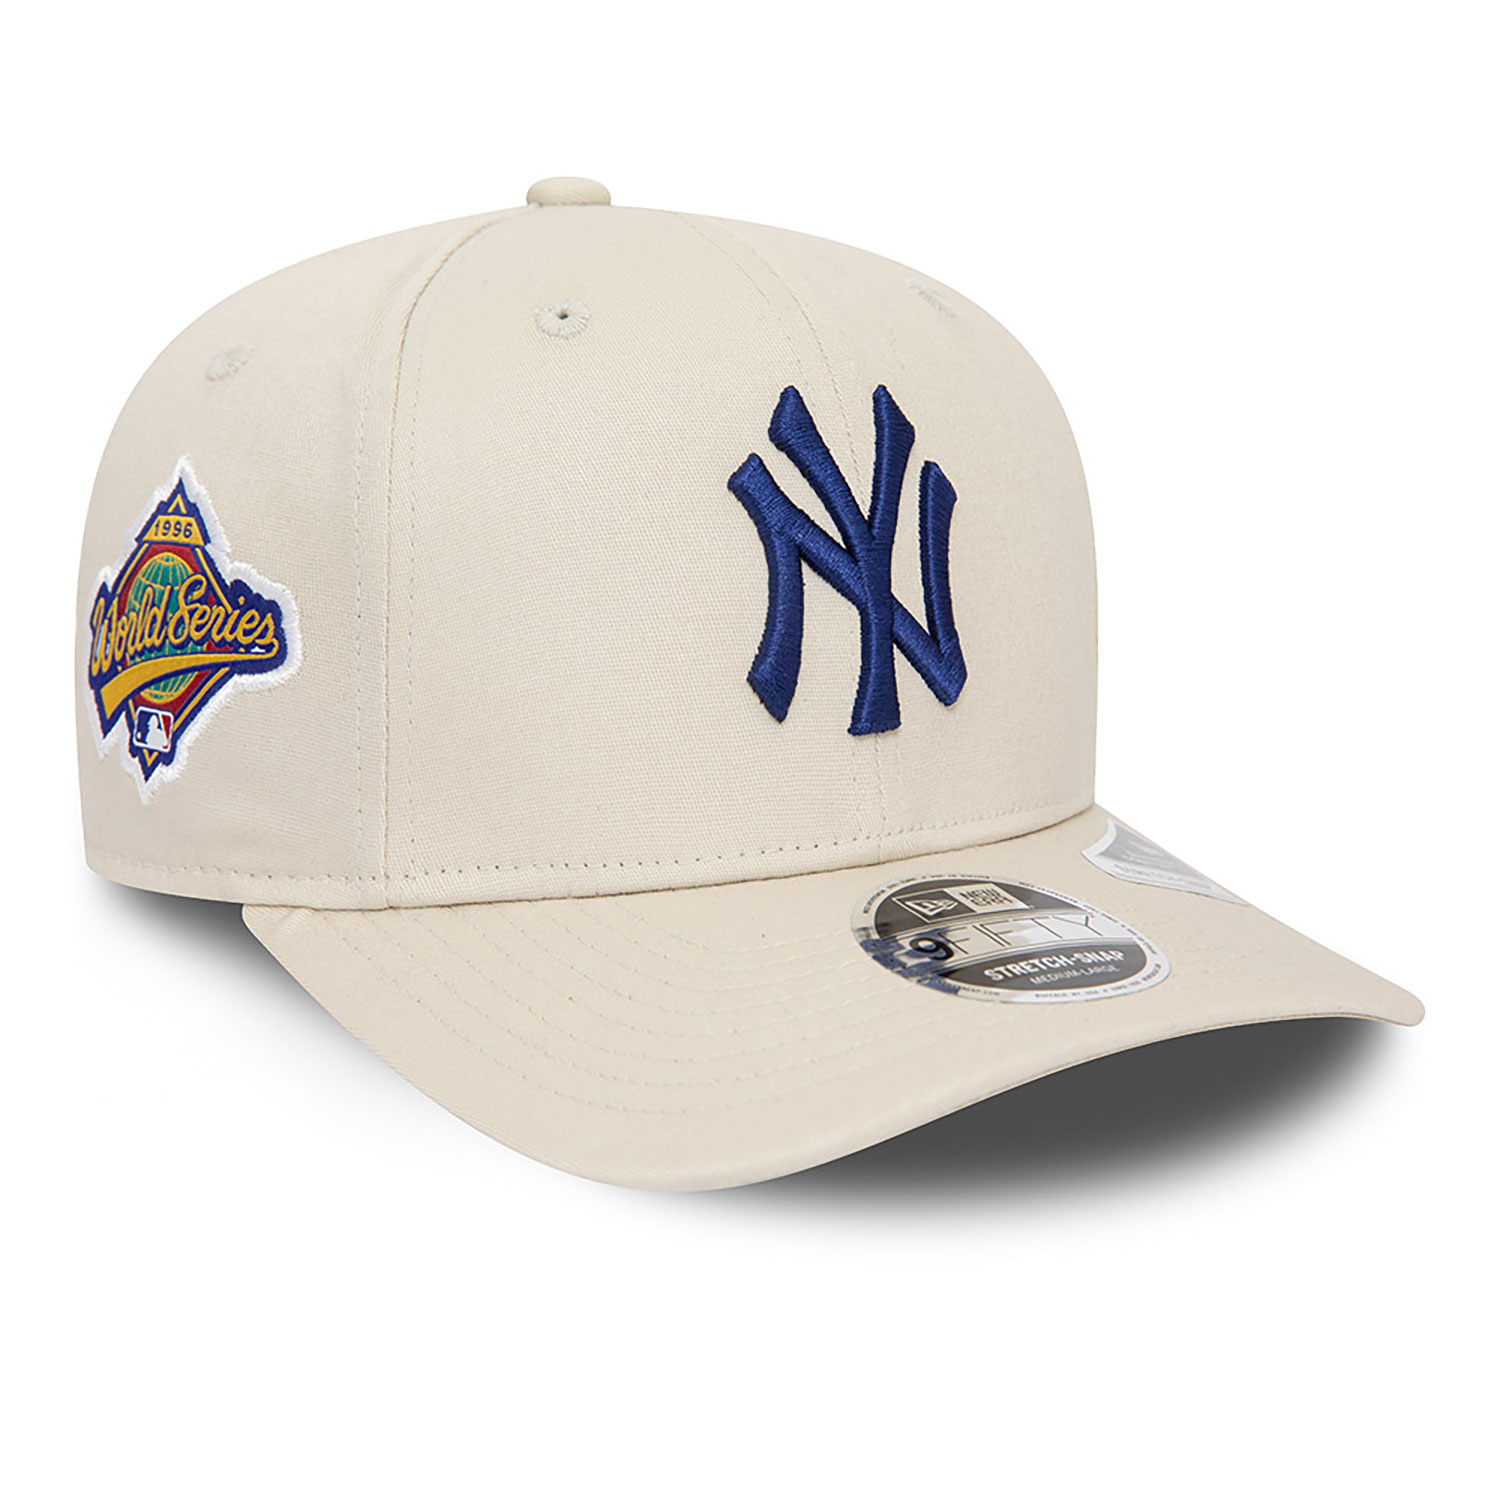 World Series New York Yankees 9FIFTY Stretch Snap Cap